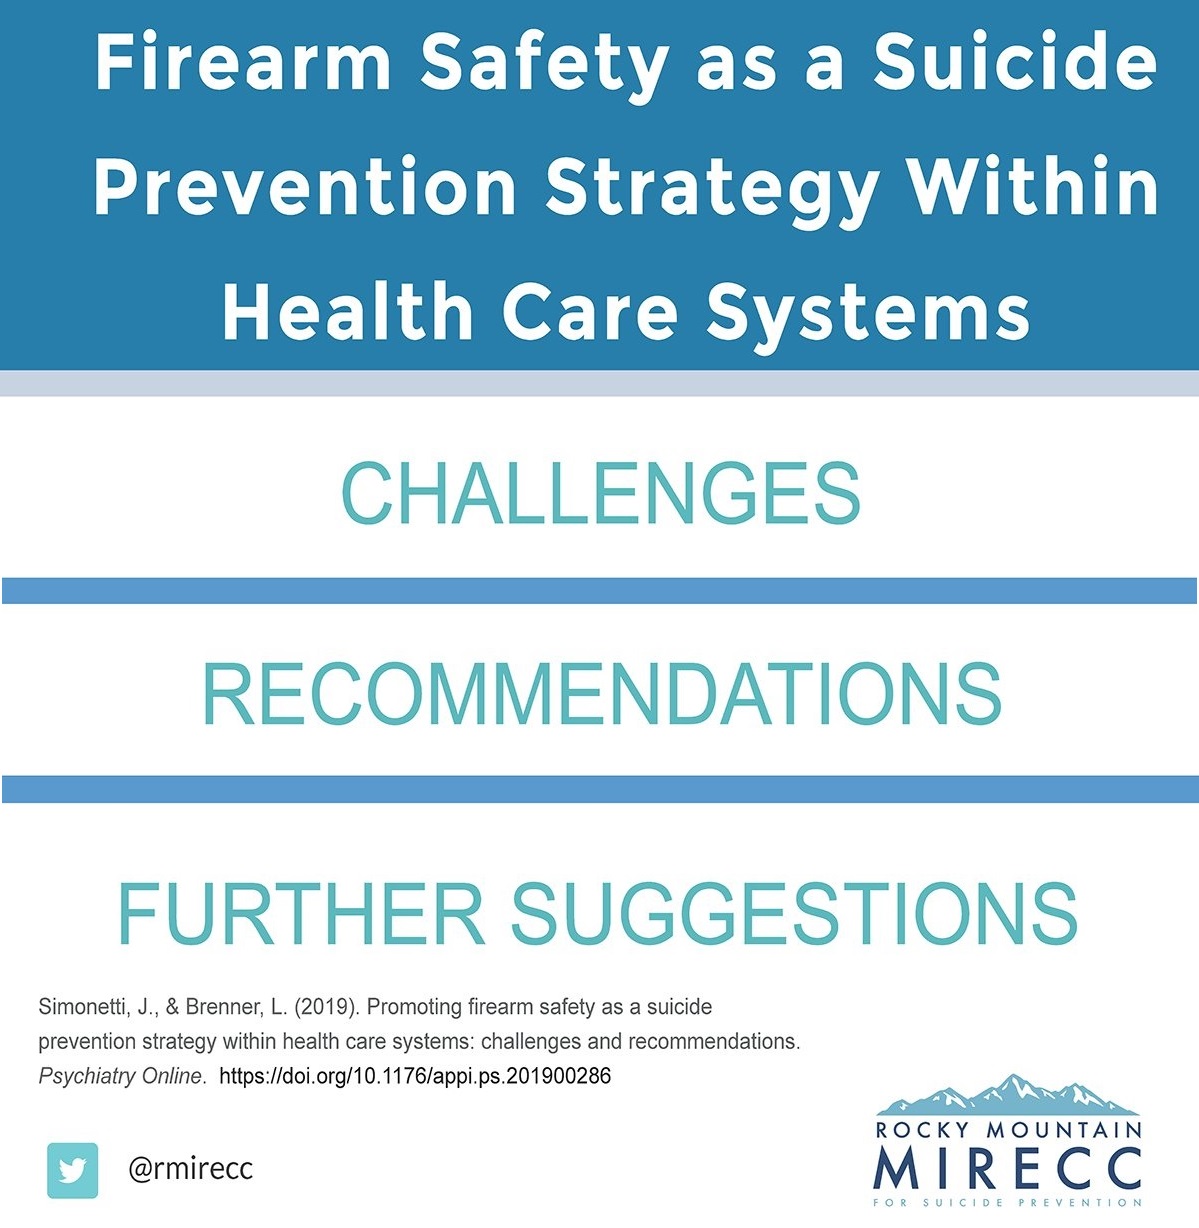 Firearm Safety & Suicide Prevention within Health Care Systems